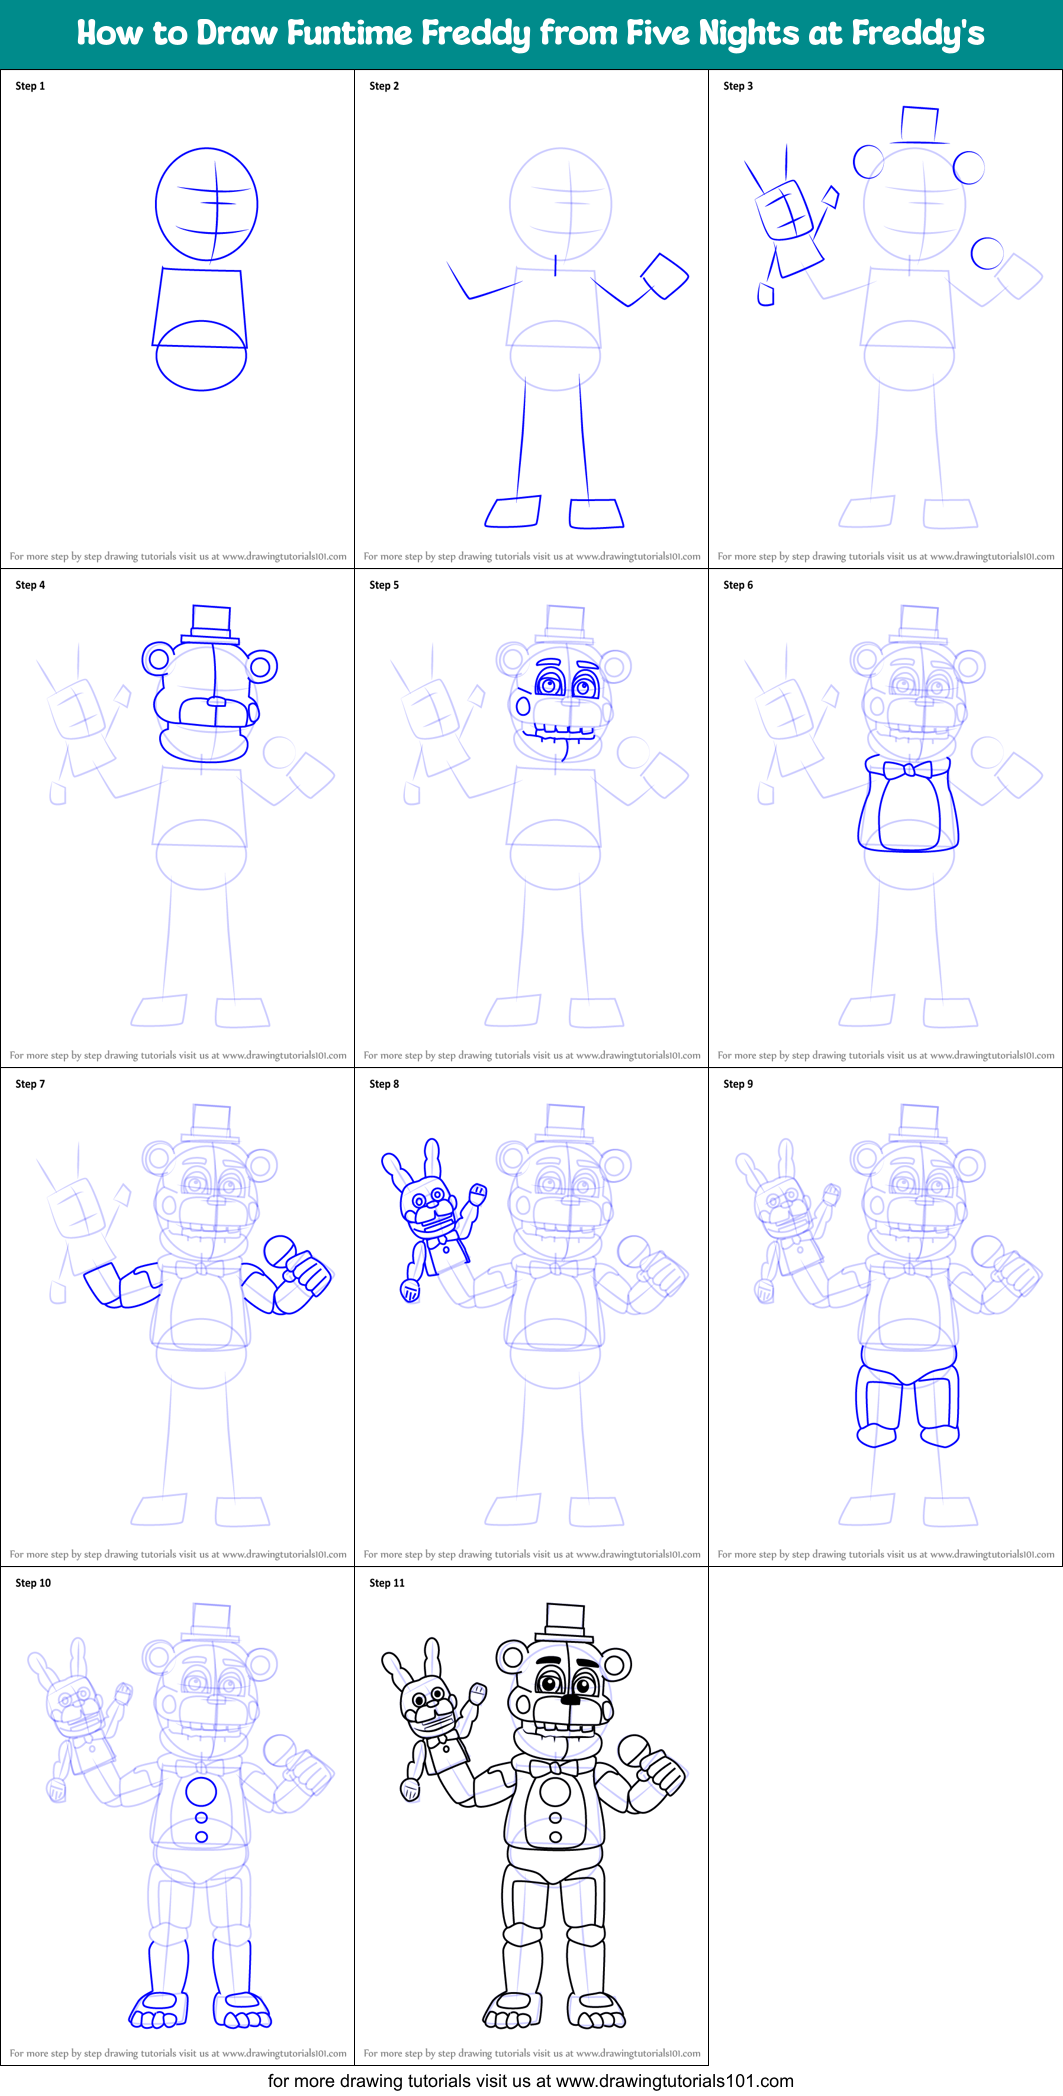 How to Draw Funtime Freddy from Five Nights at Freddy's printable step